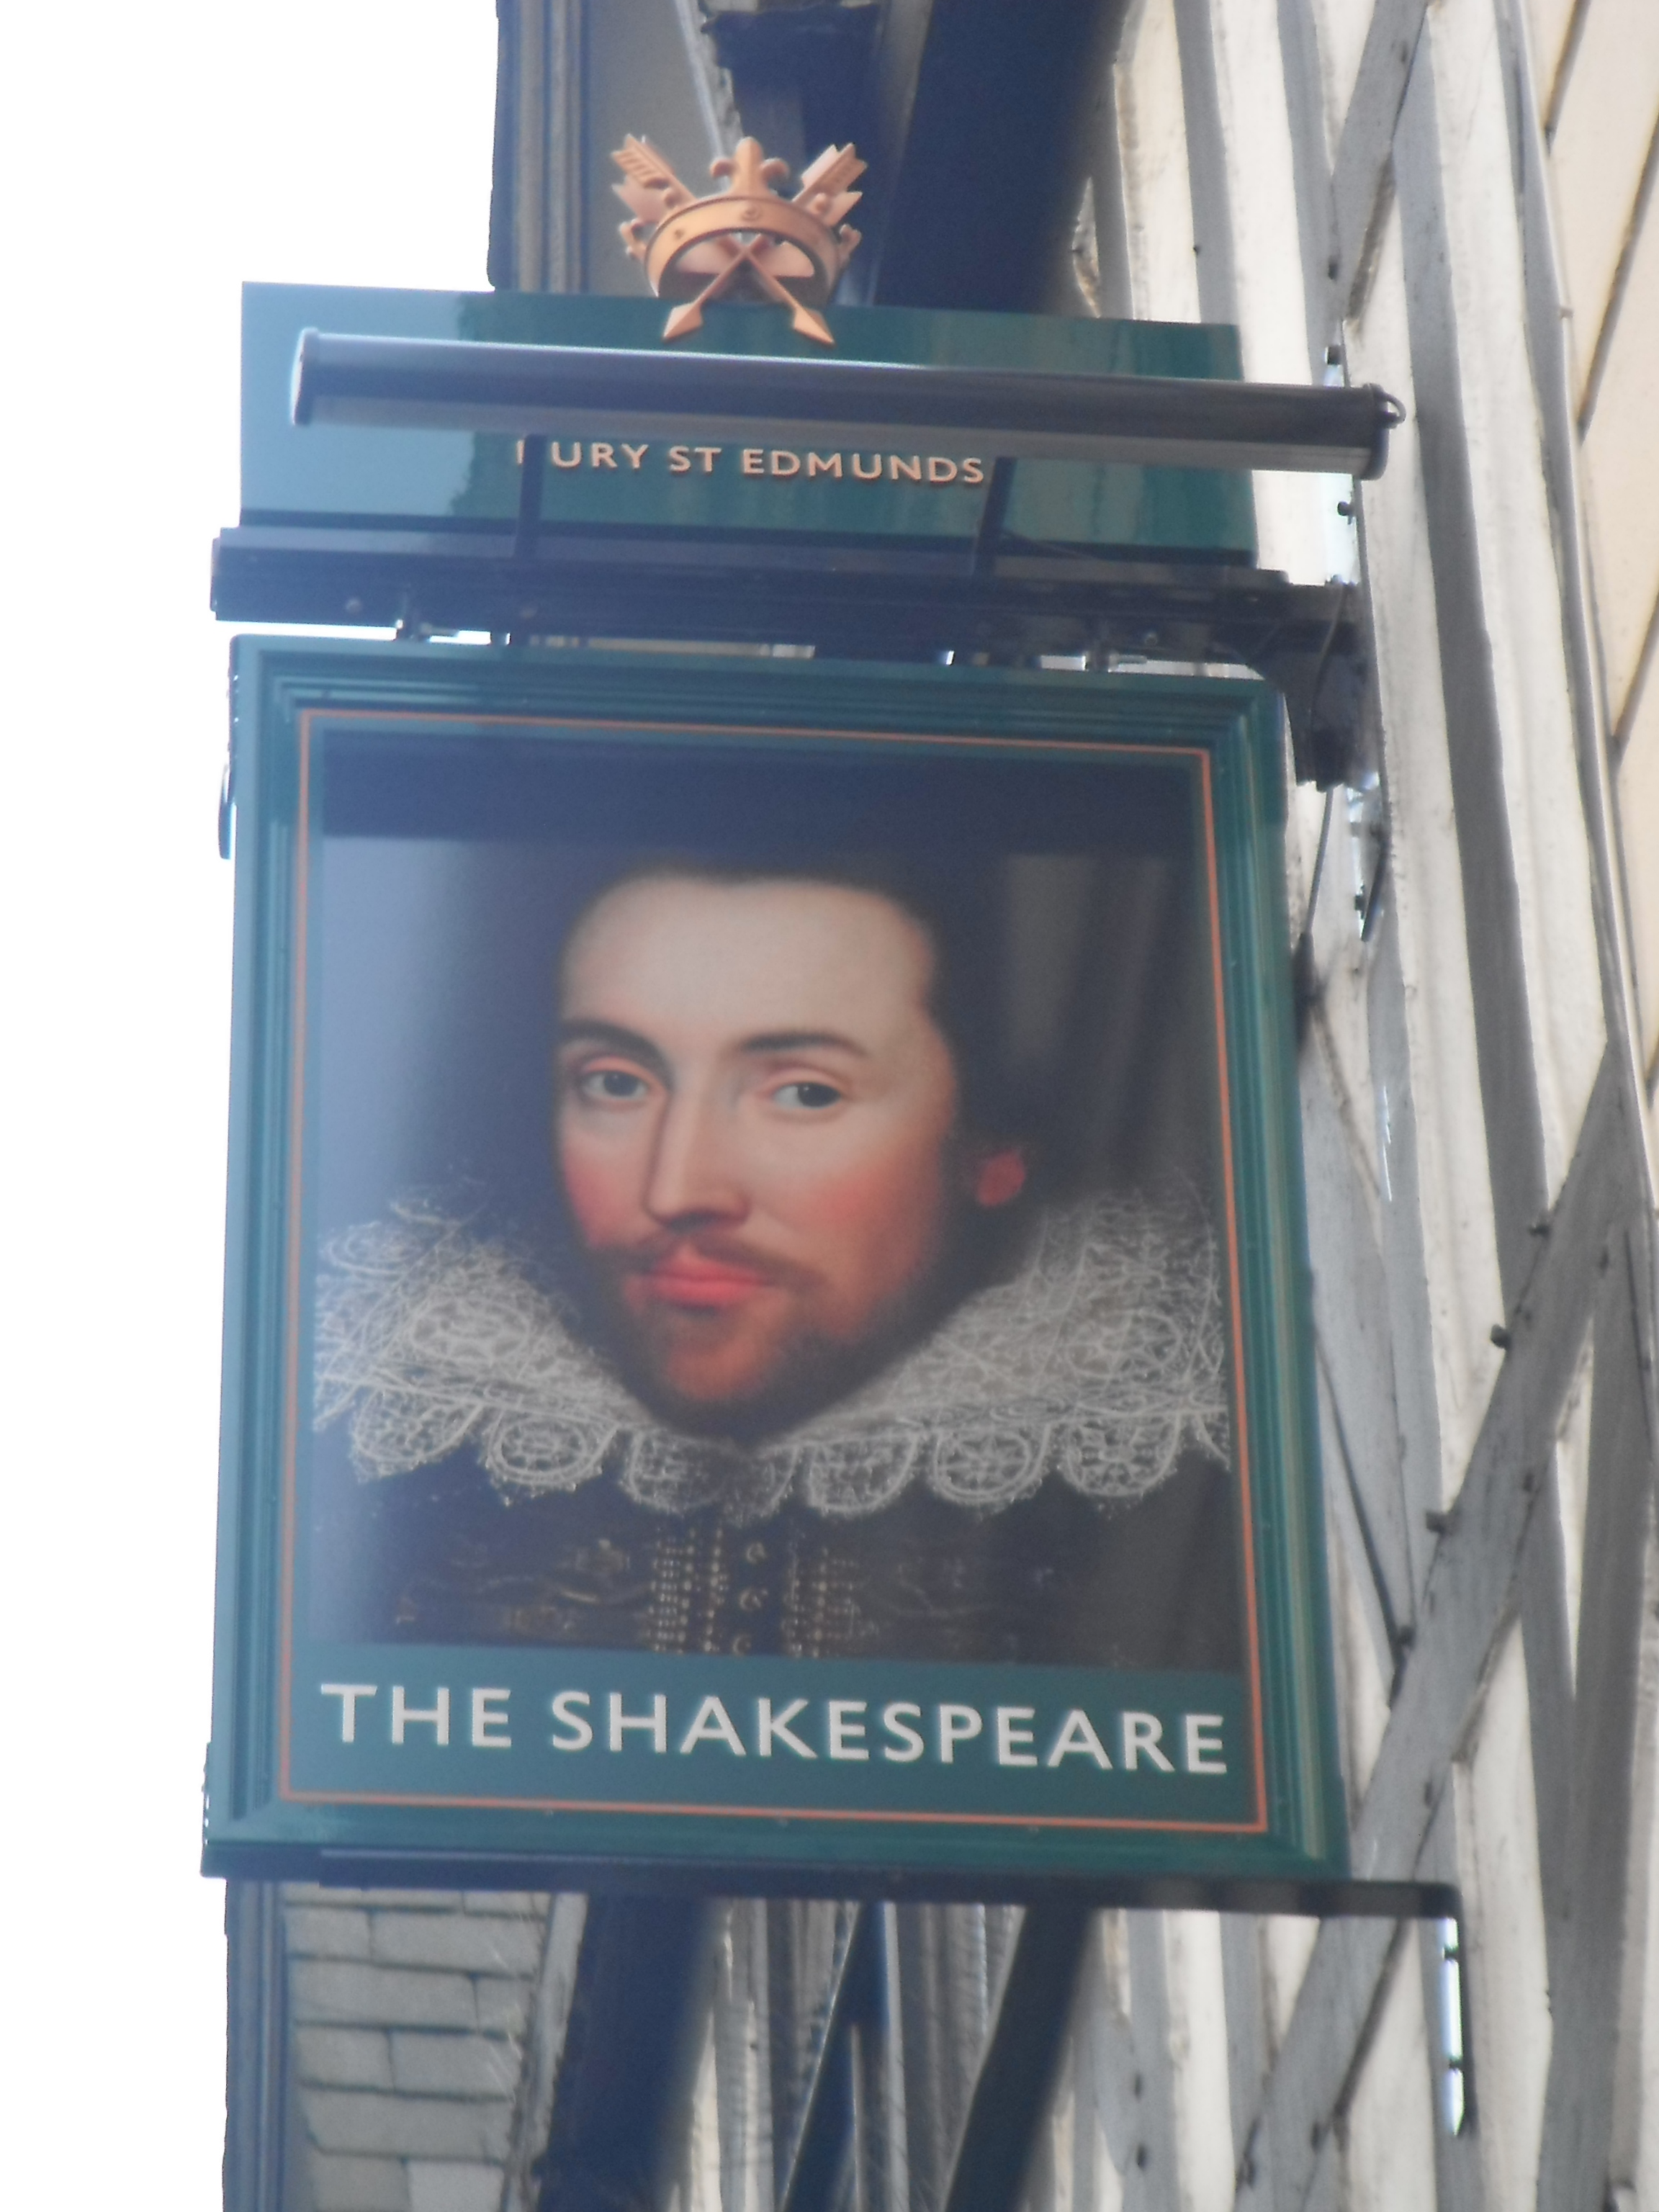 Photo taken by me – The Shakespeare pub sign, Manchester